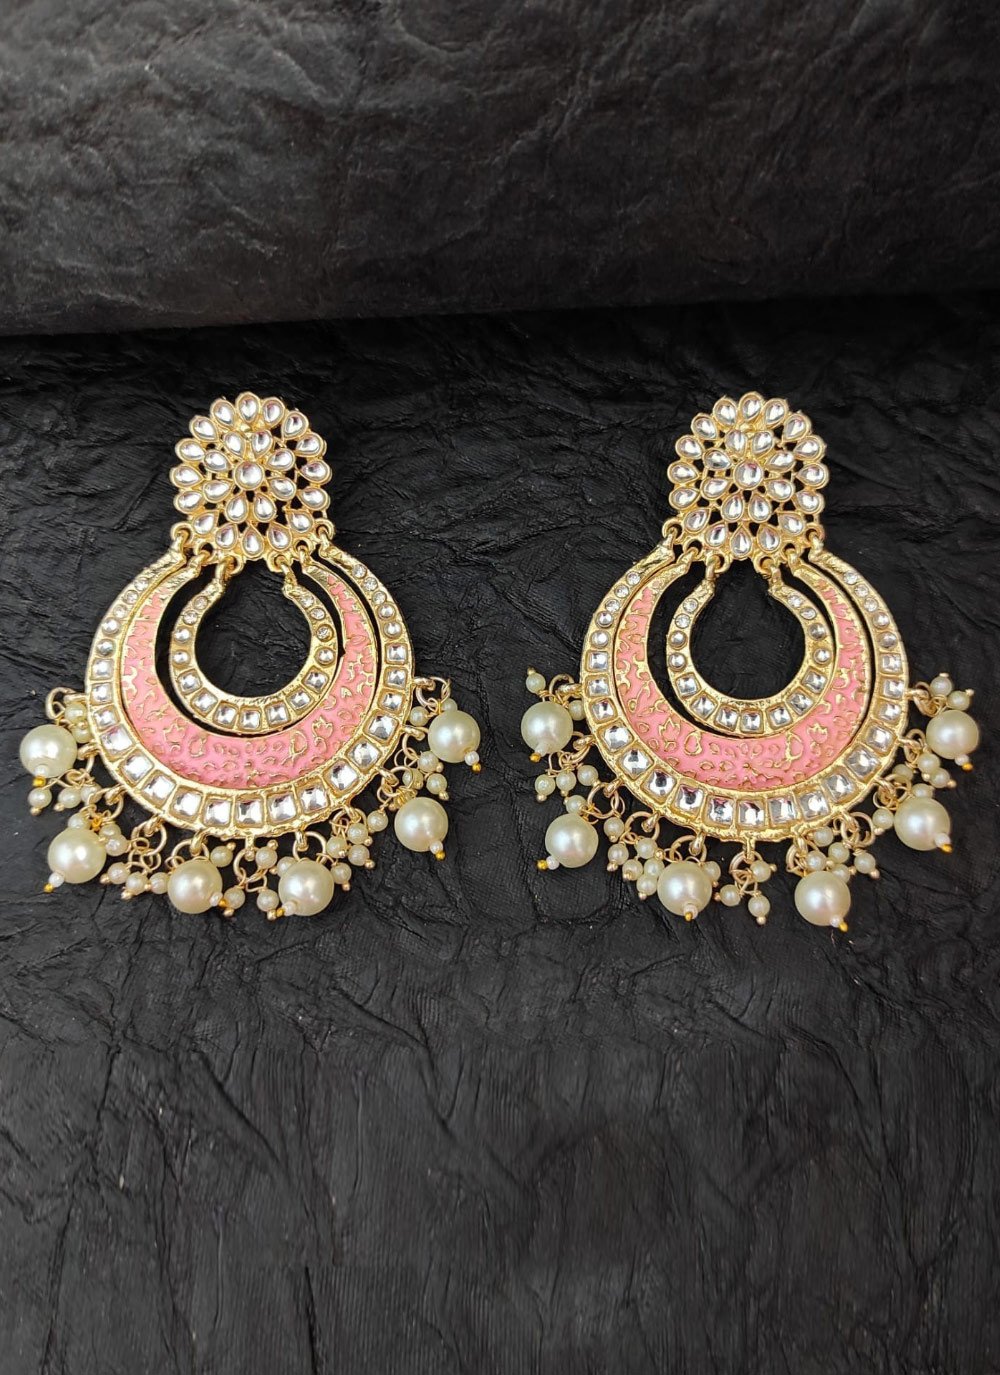 Superb Alloy Gold Rodium Polish Moti Work Pink and White Earrings